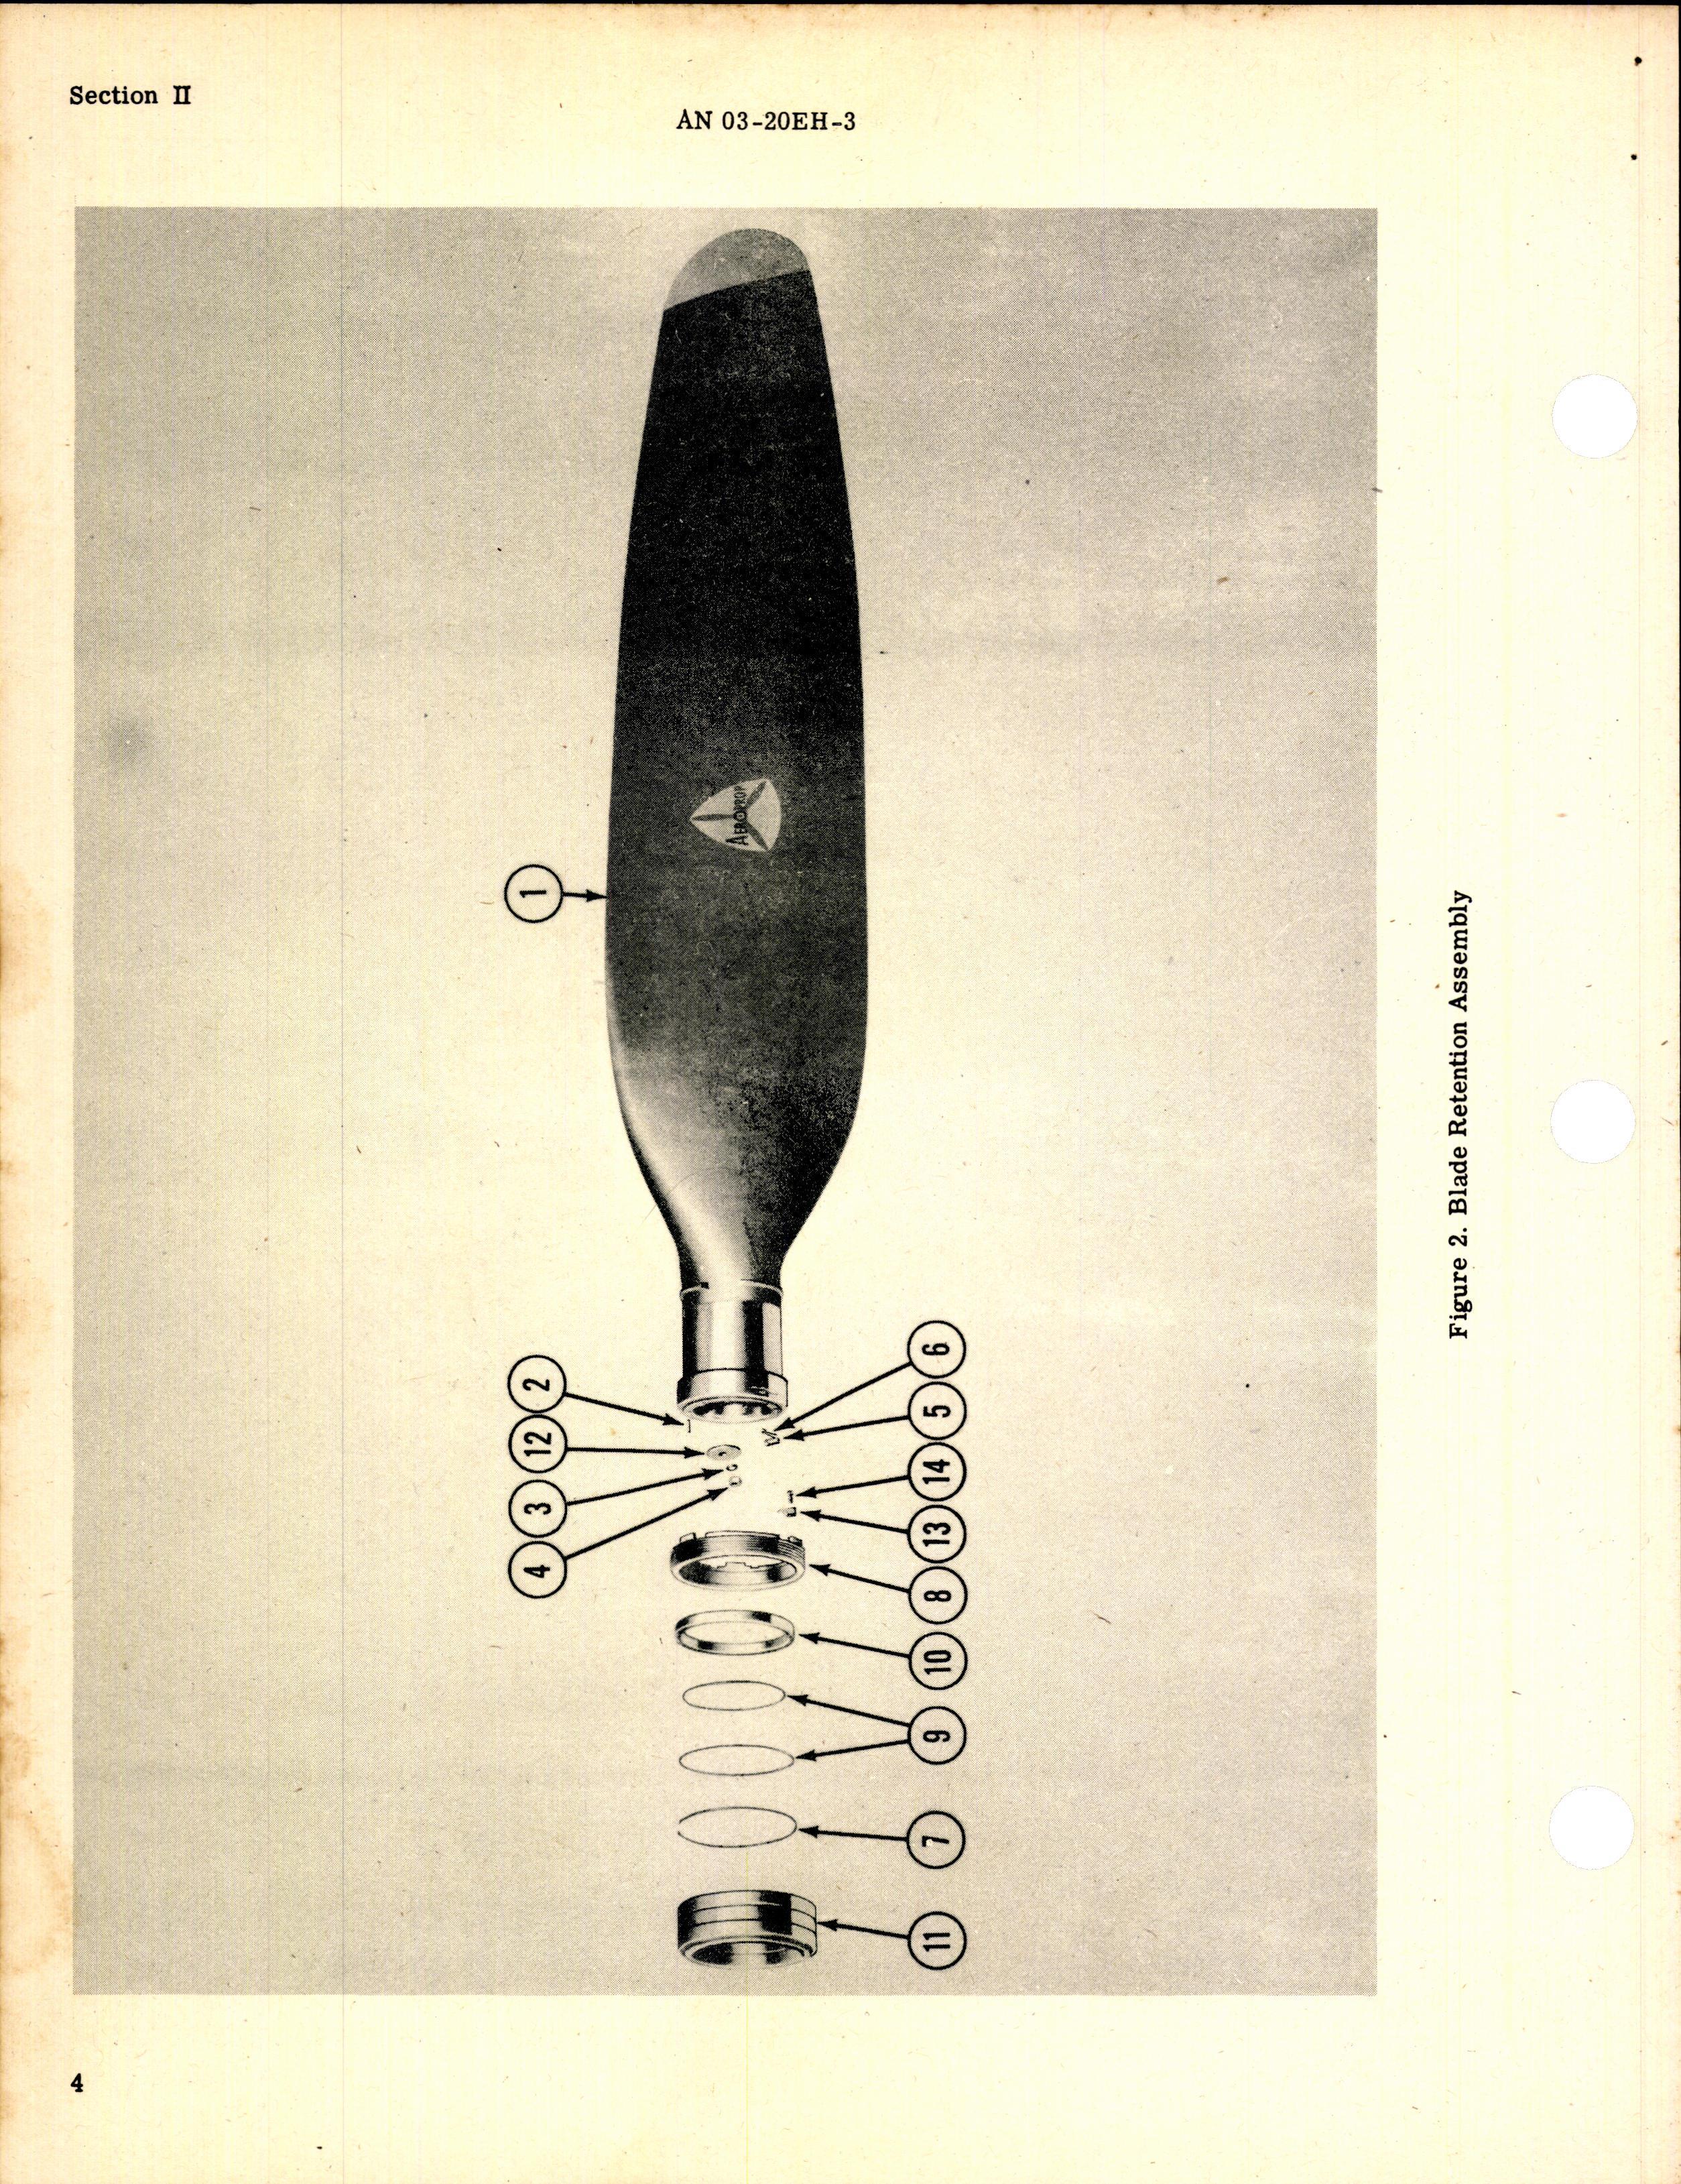 Sample page 6 from AirCorps Library document: Parts Catalog for Hydraulic Propeller Model A322F-A1